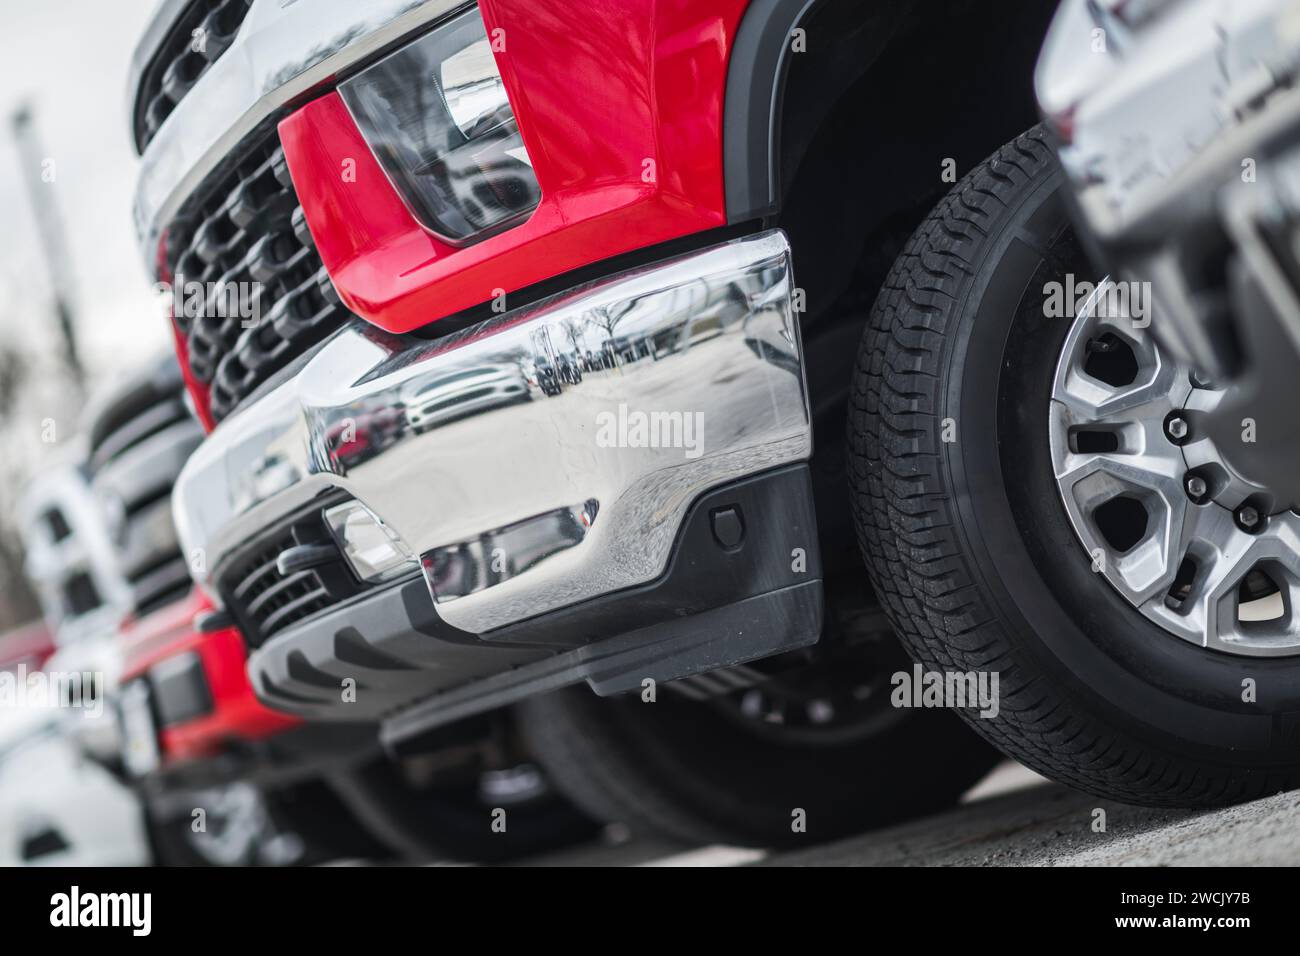 New and Pre Owned Pickup Trucks Dealership Inventory Automotive Theme. Stock Photo